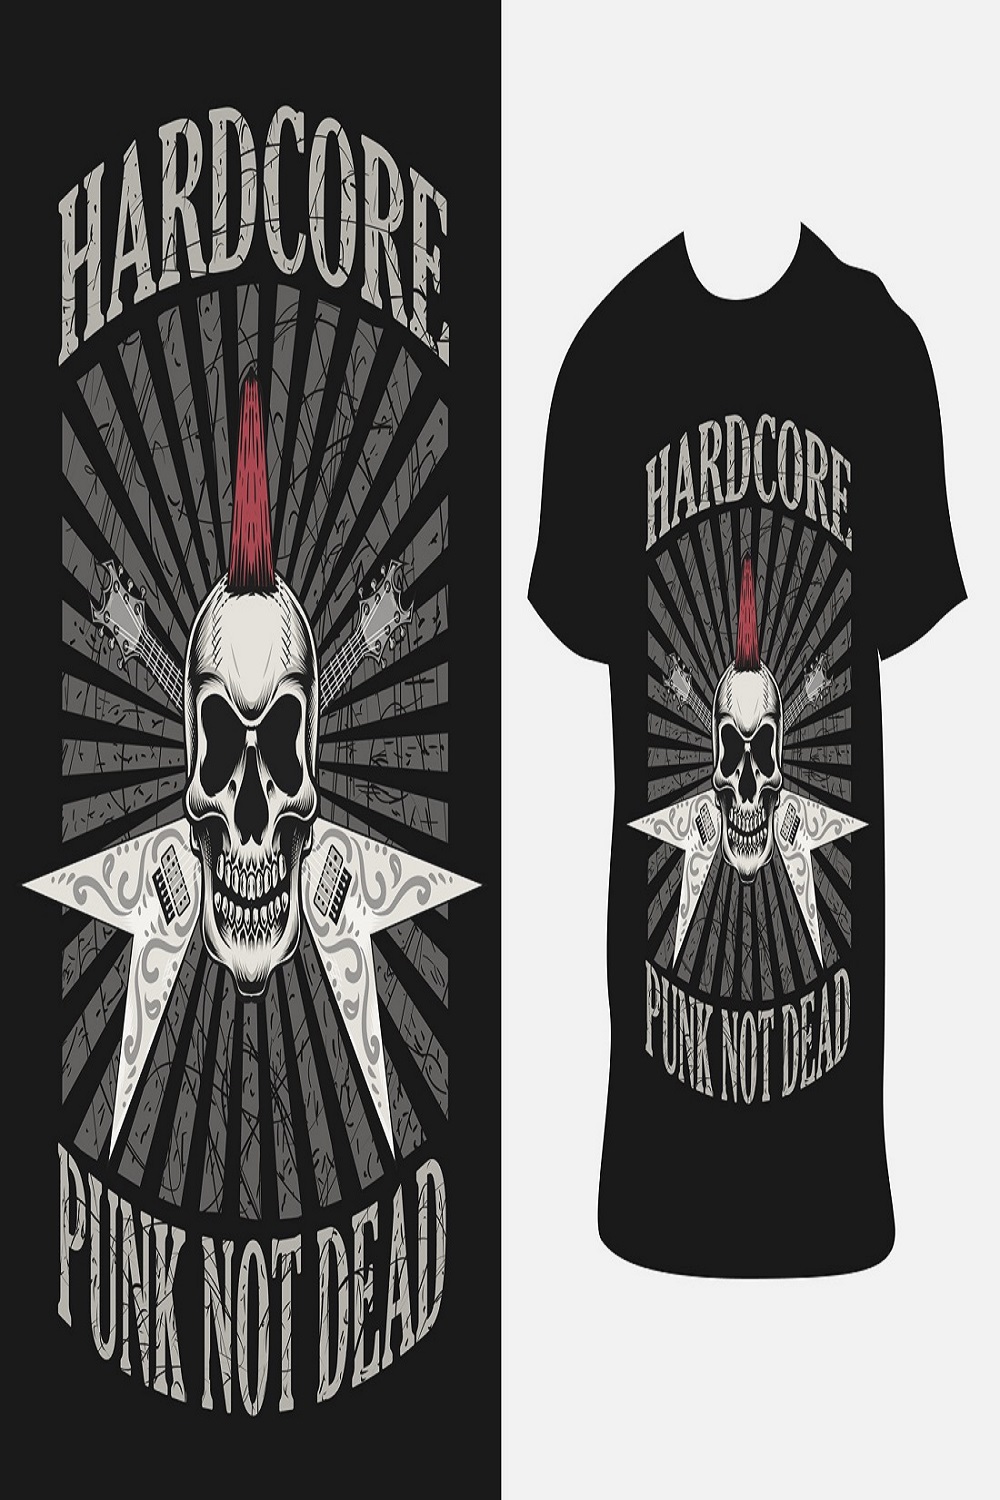 Hardcore punk skull with t-shirt design pinterest preview image.